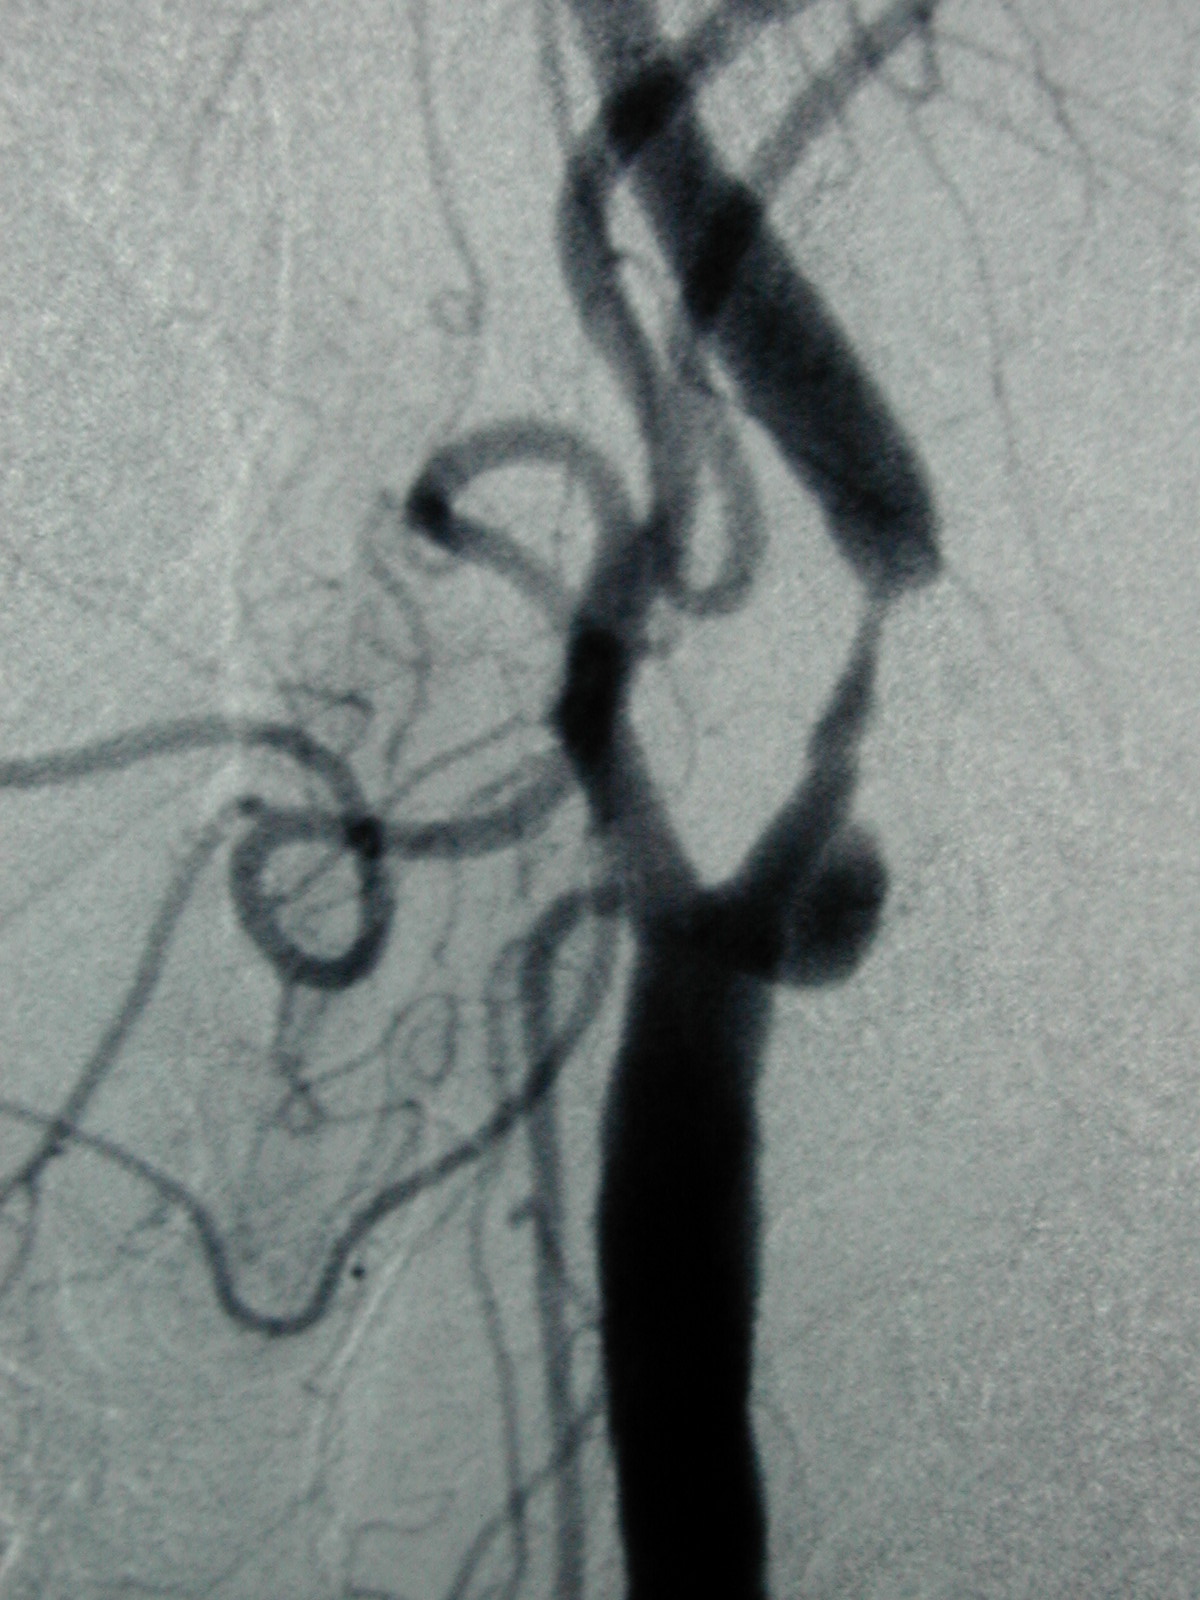 A severe stenosis in the internal carotid artery (ICA). The ICA is one of the main arteries that feeds the eyes and parts of the cerebral hemispheres. Scarce supply of blood to these areas may lead to strokes. 